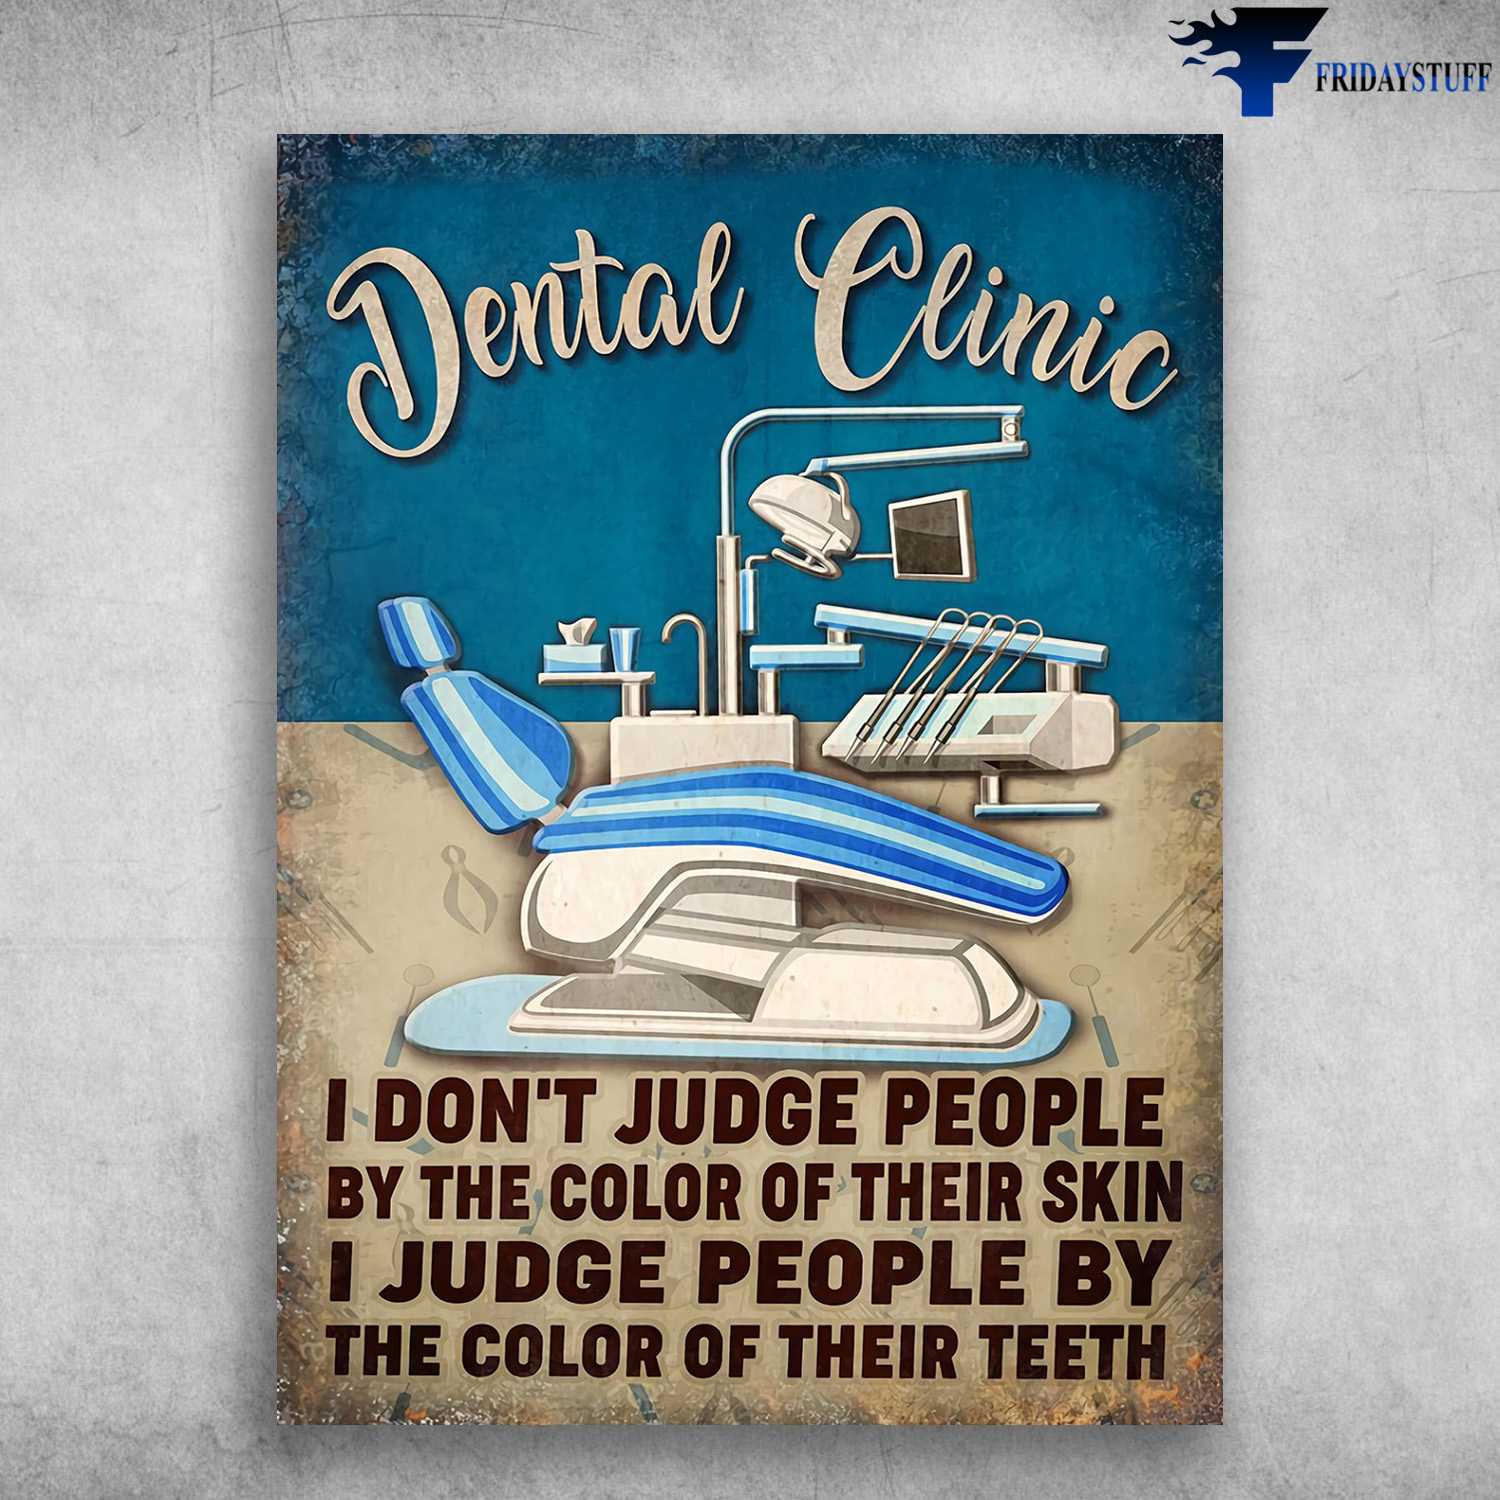 Dentist Poster, I Don't Judge People, By The Color Of Their Skin, I Judge People By The Color, Of Their Teeth